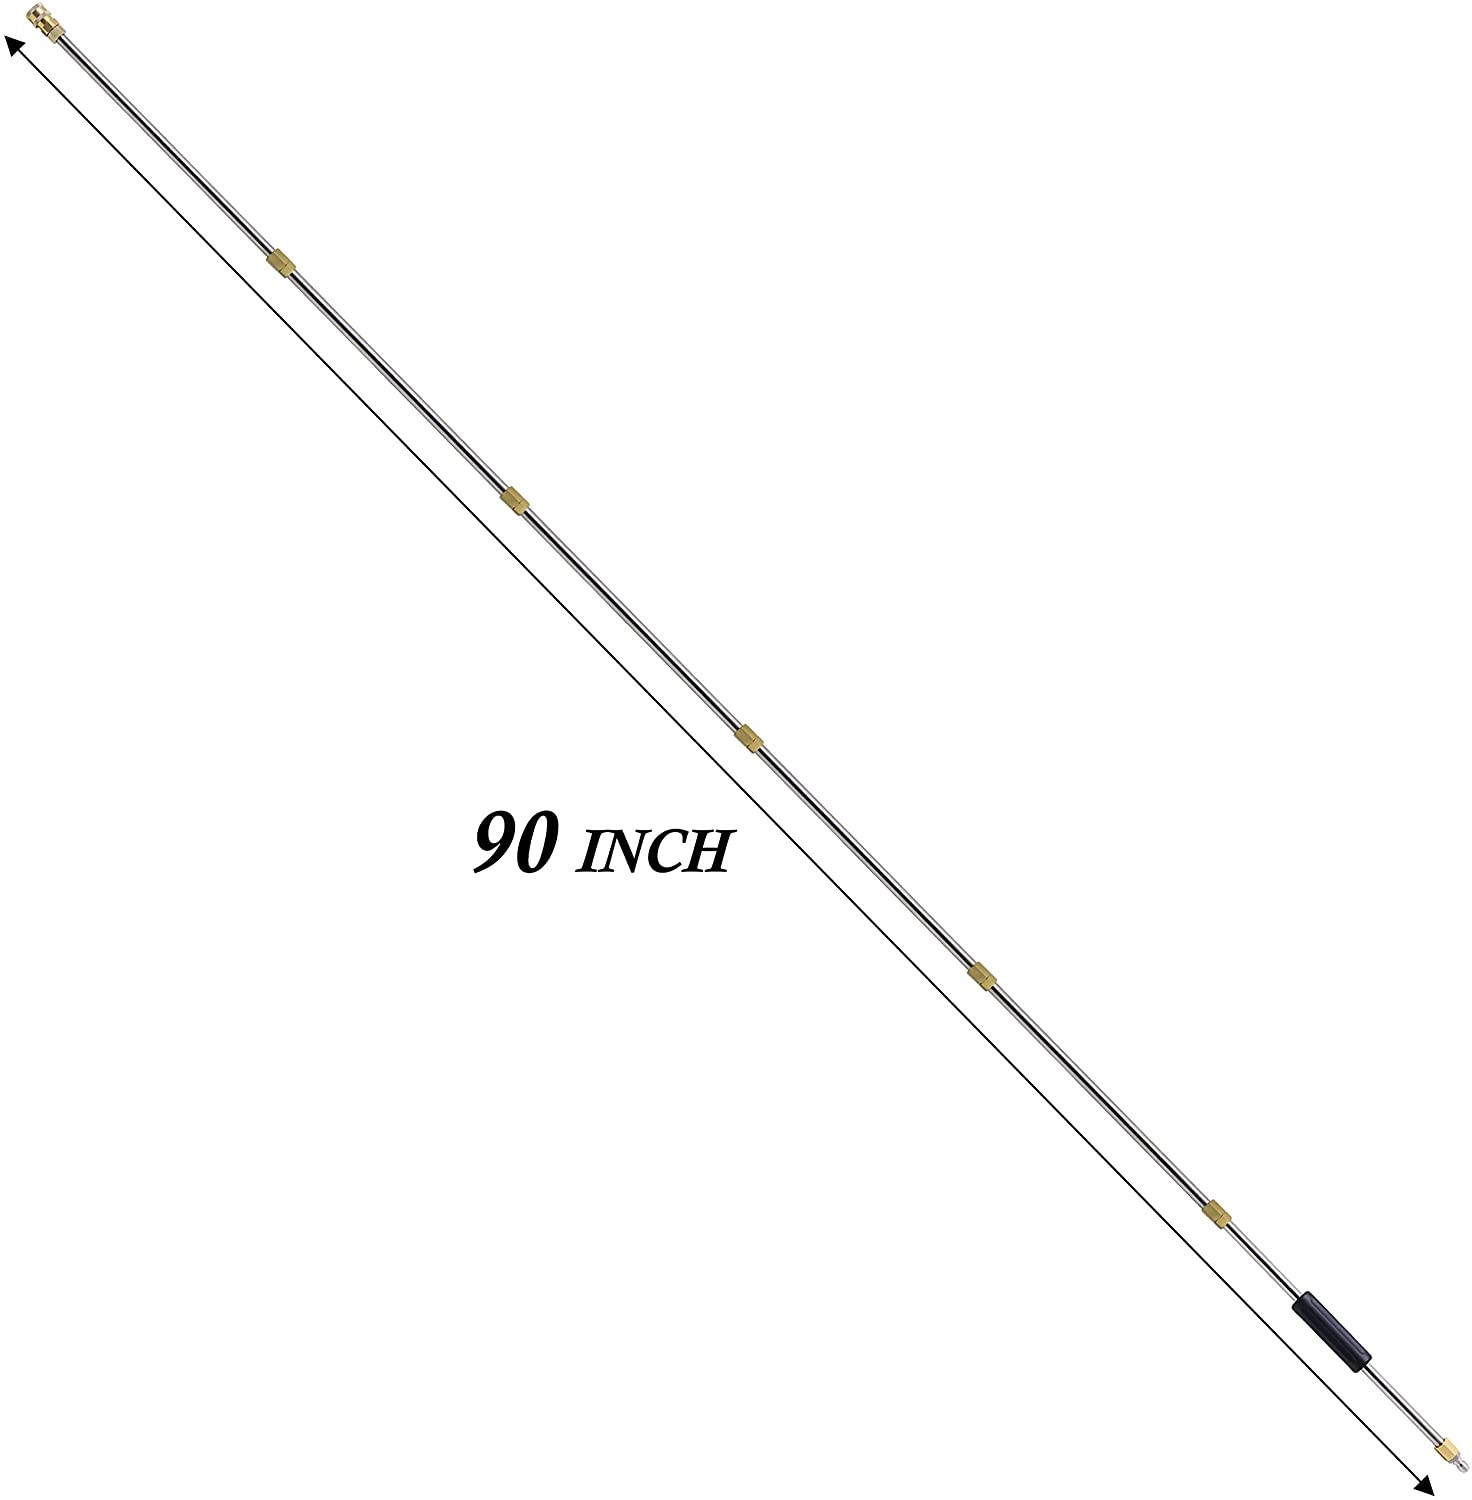 Pressure Washer Extension Wand, 90 Inch Power Washer Lance